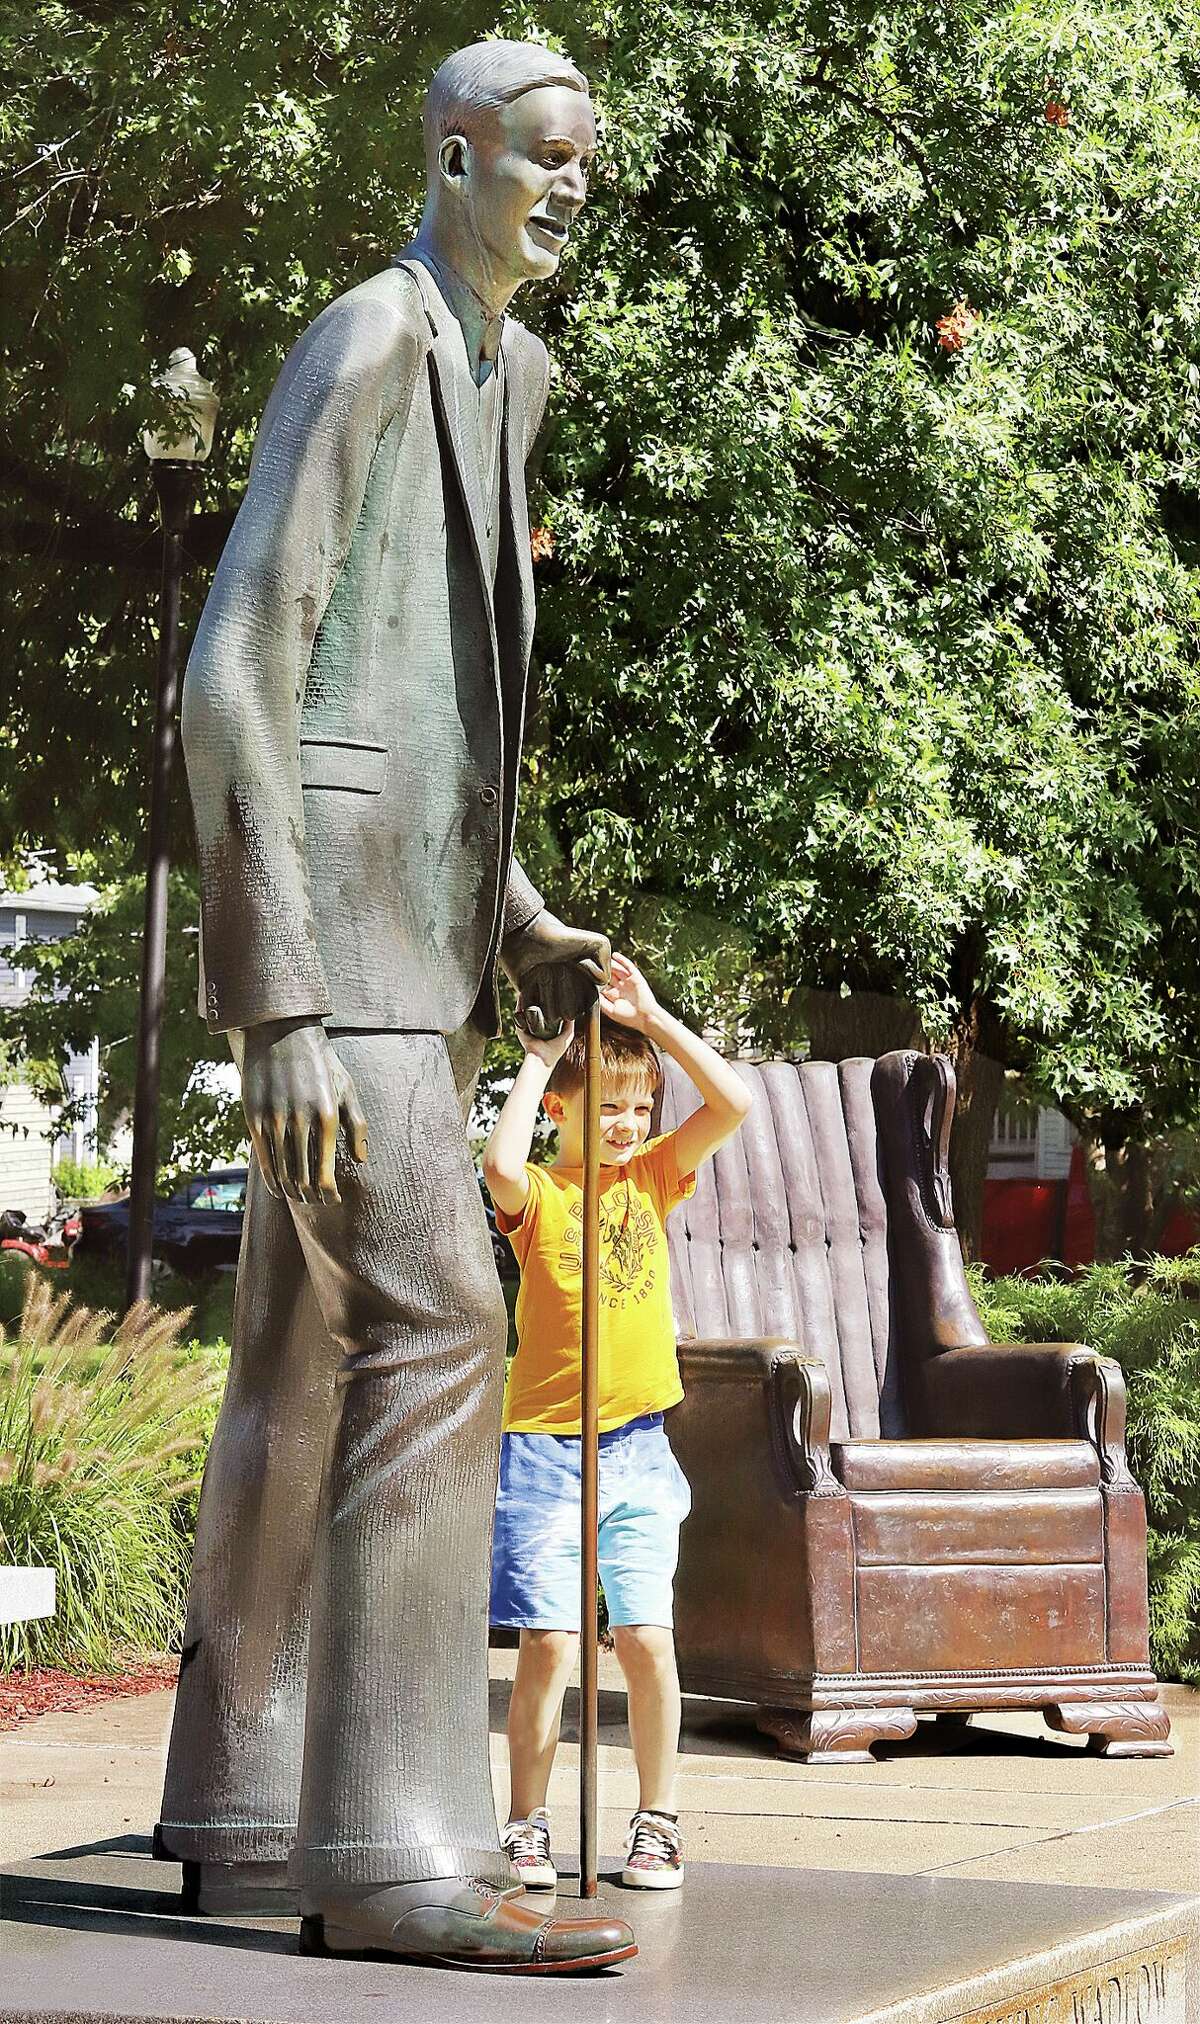 John Badman|The Telegraph Denver Jaco, 8, of Edwardsville, who is being home schooled, learned Tuesday that he was as tall as Robert Wadlow's cane. Denver was visiting the statue of Wadlow, the tallest man in the world, with family members as part of their home education. It was a great day for anything outdoors Tuesday, but temperatures are forecast to climb a few degrees all week and be in the low 90's by the weekend.